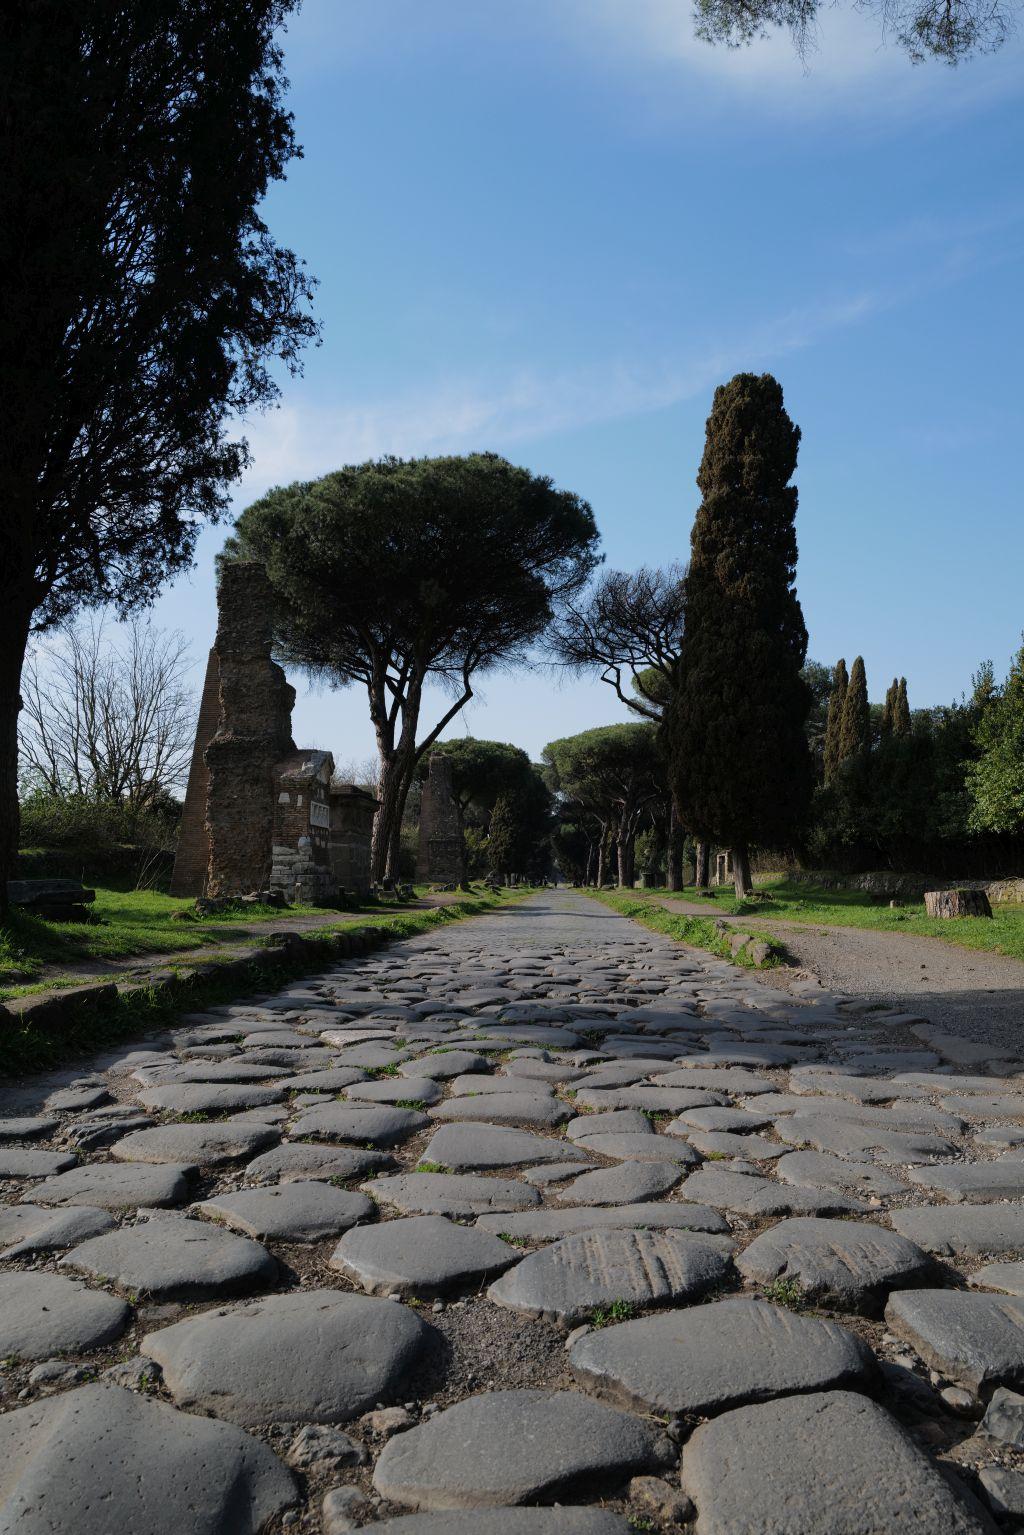 "Centuries of history" (Via Appia Antica, Rome, Italy) - Photography 1/3 LEICA Q2 - Unframed photo - Quotation € 600.00